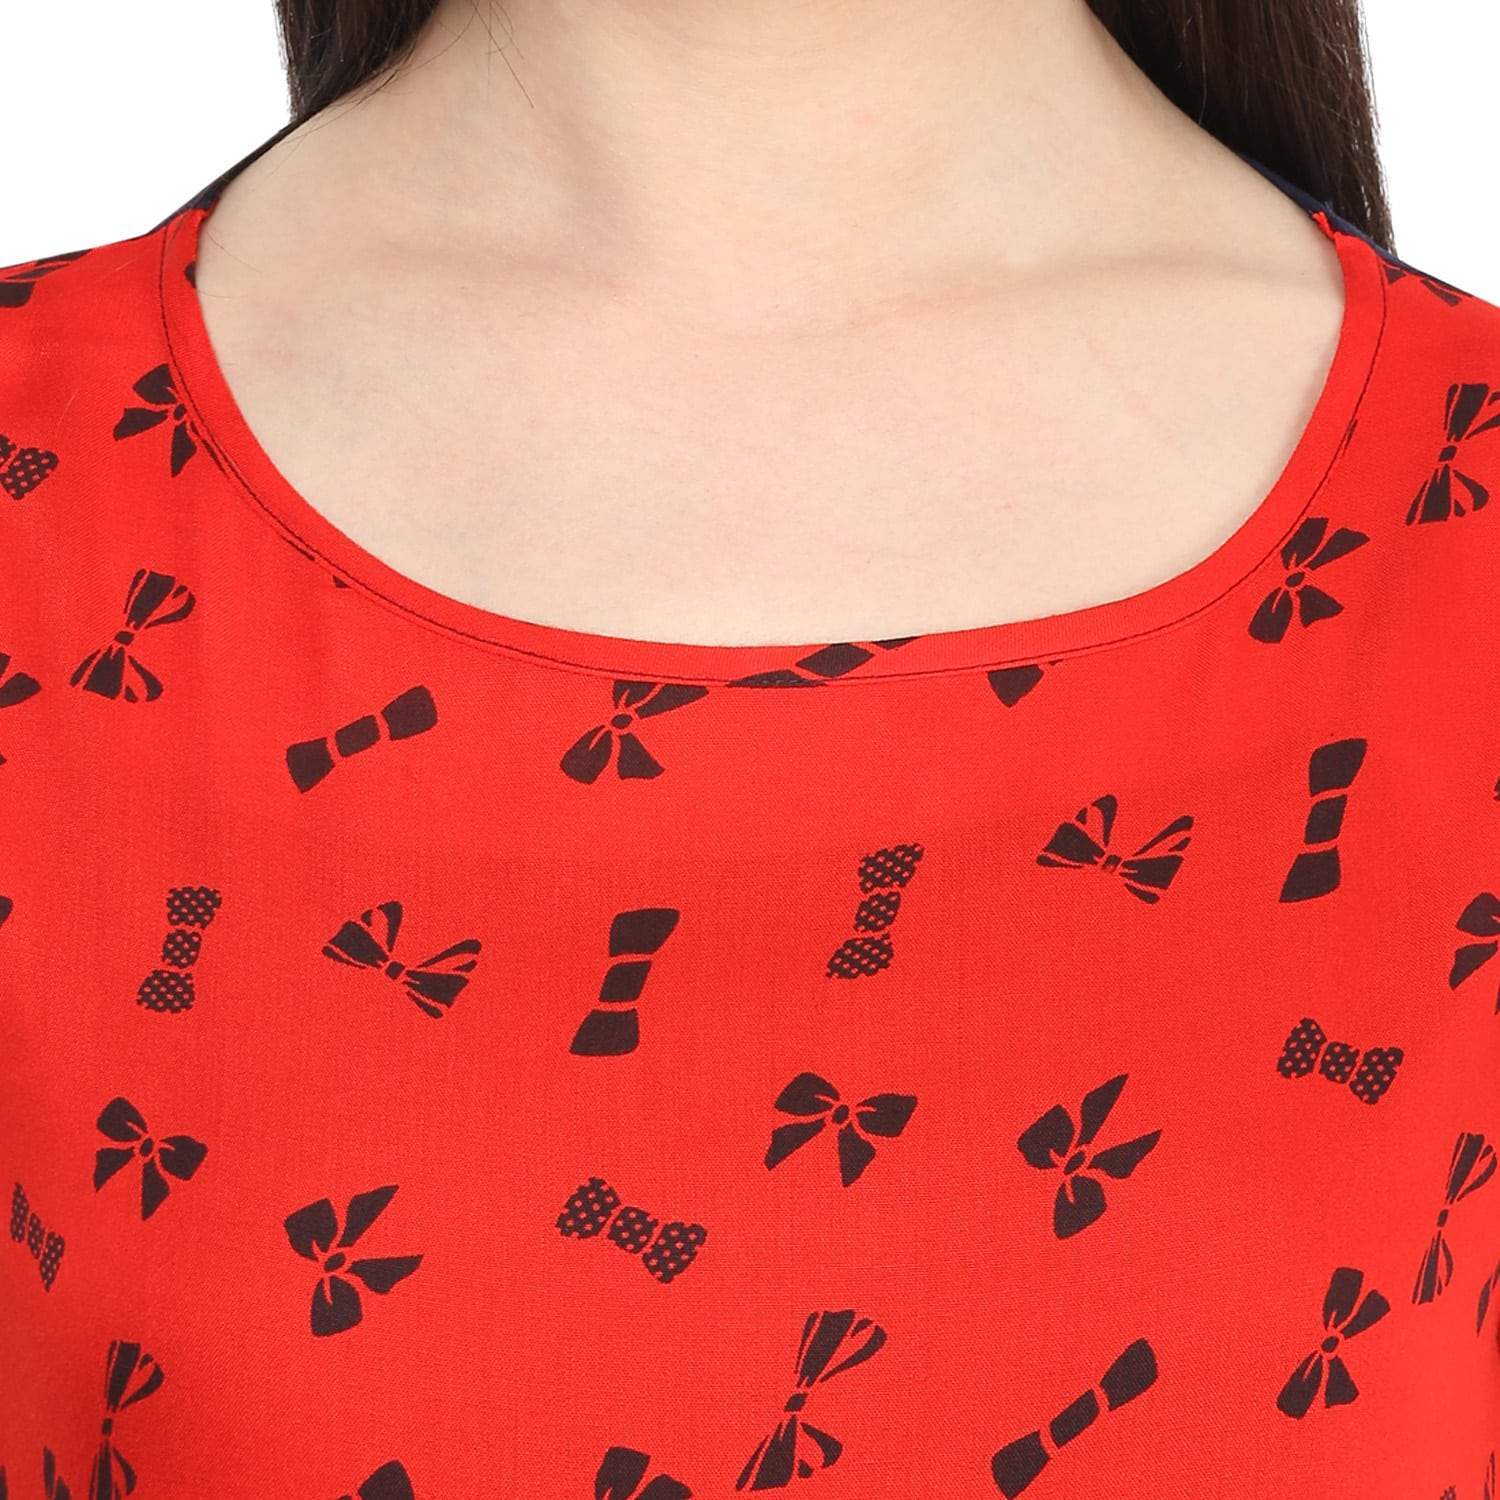 Women's Red Bow Crop Top - Pannkh